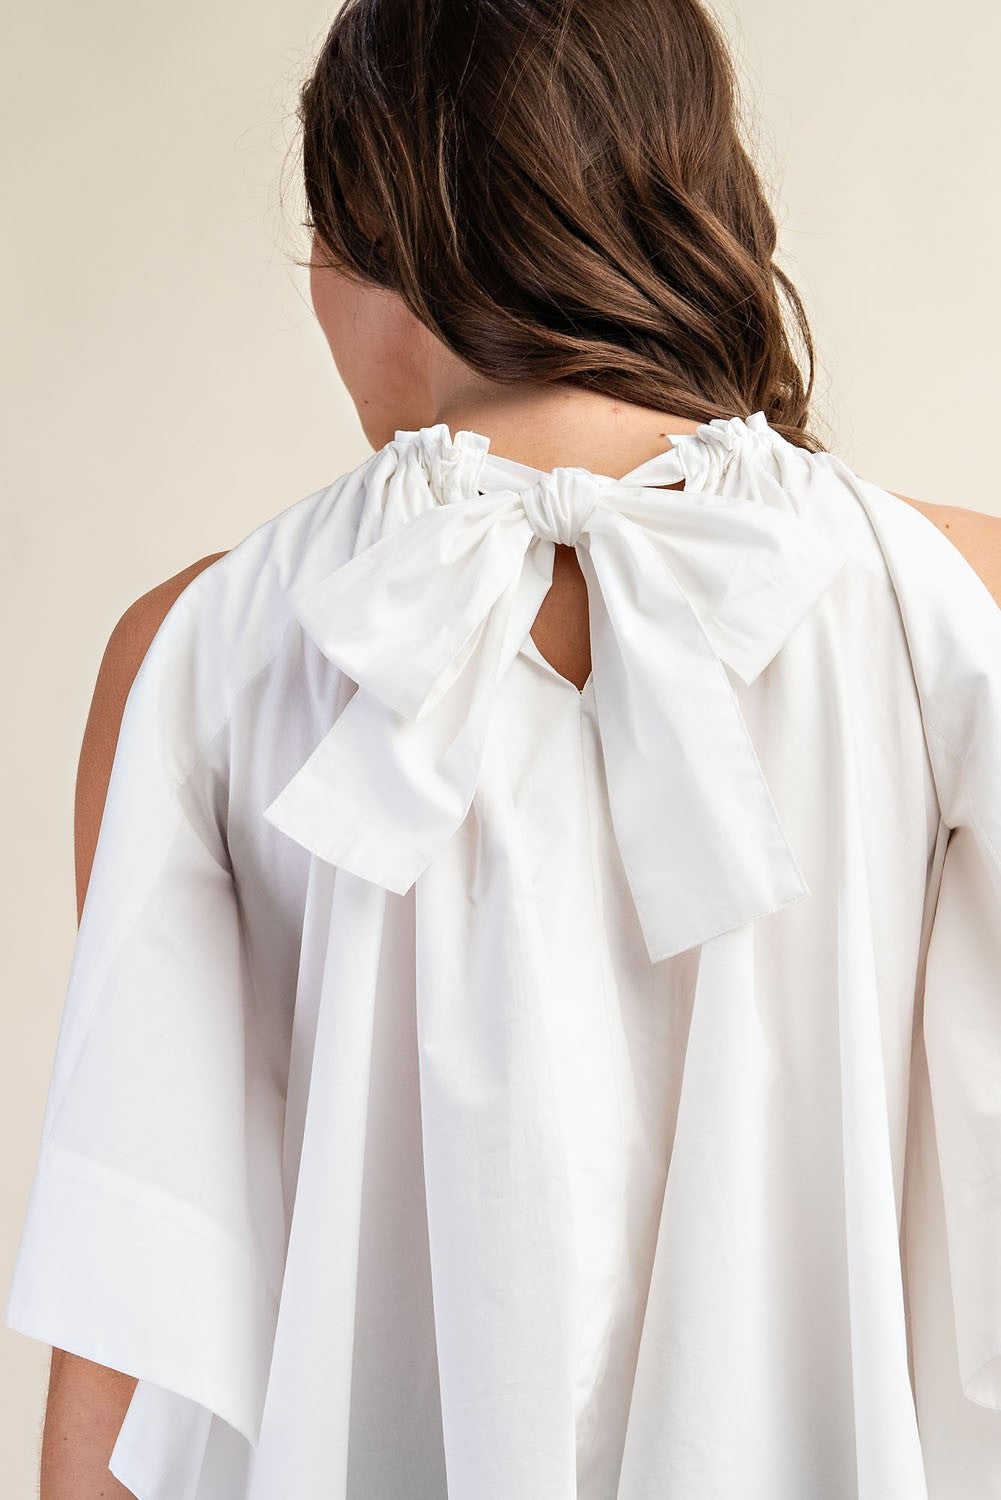 BOWING IN THE WIND SUMMER TOP-WHITE